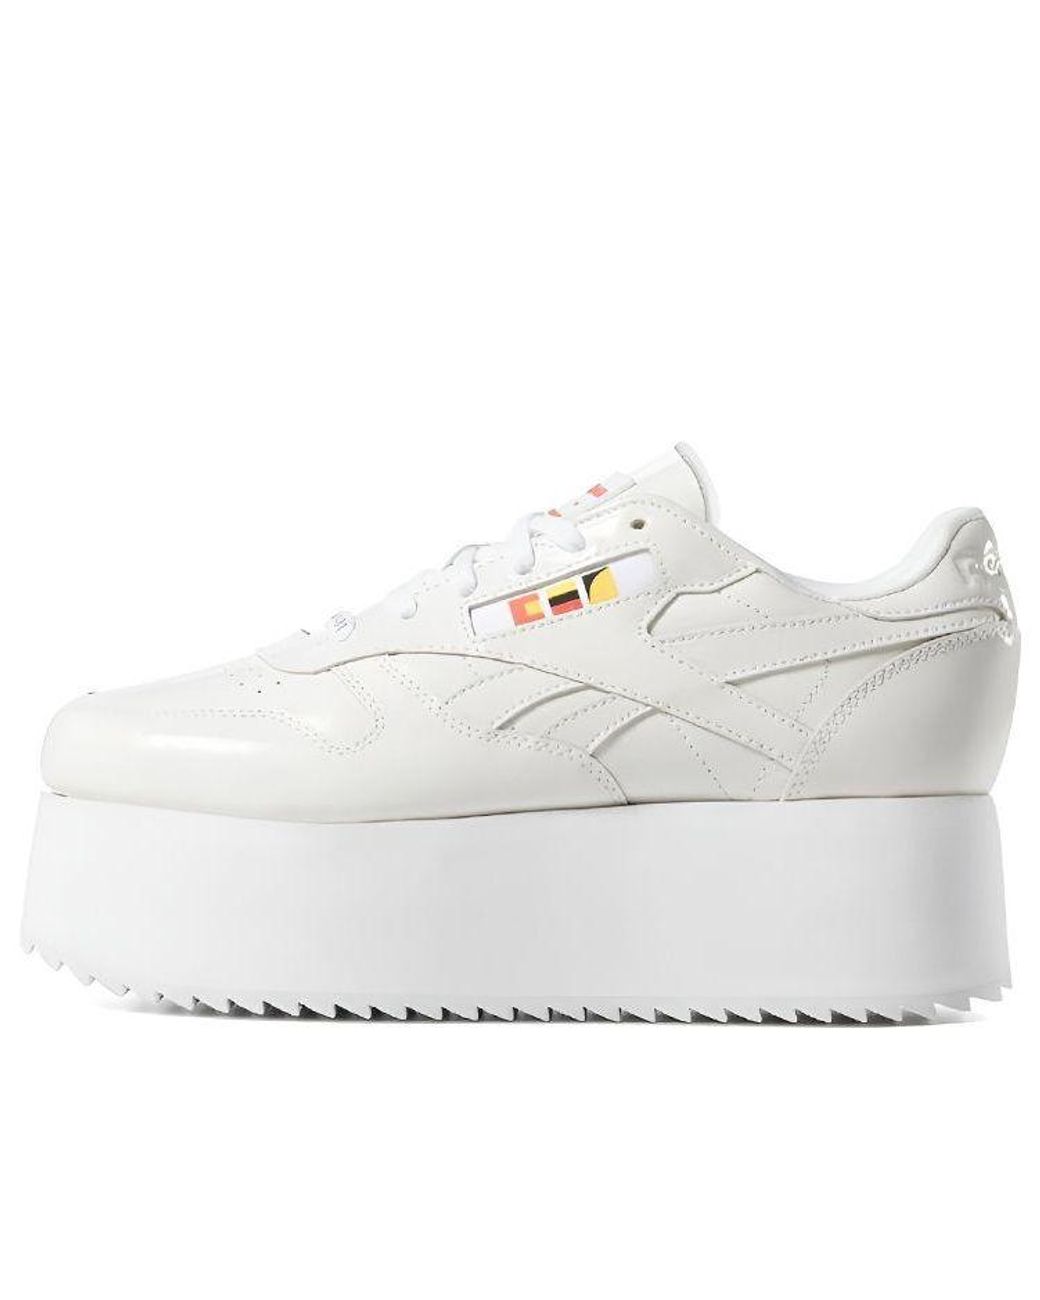 Reebok Gigi Hadid X Classic Leather Triple Thick Sole Casual Skateboarding  Shoes in White | Lyst